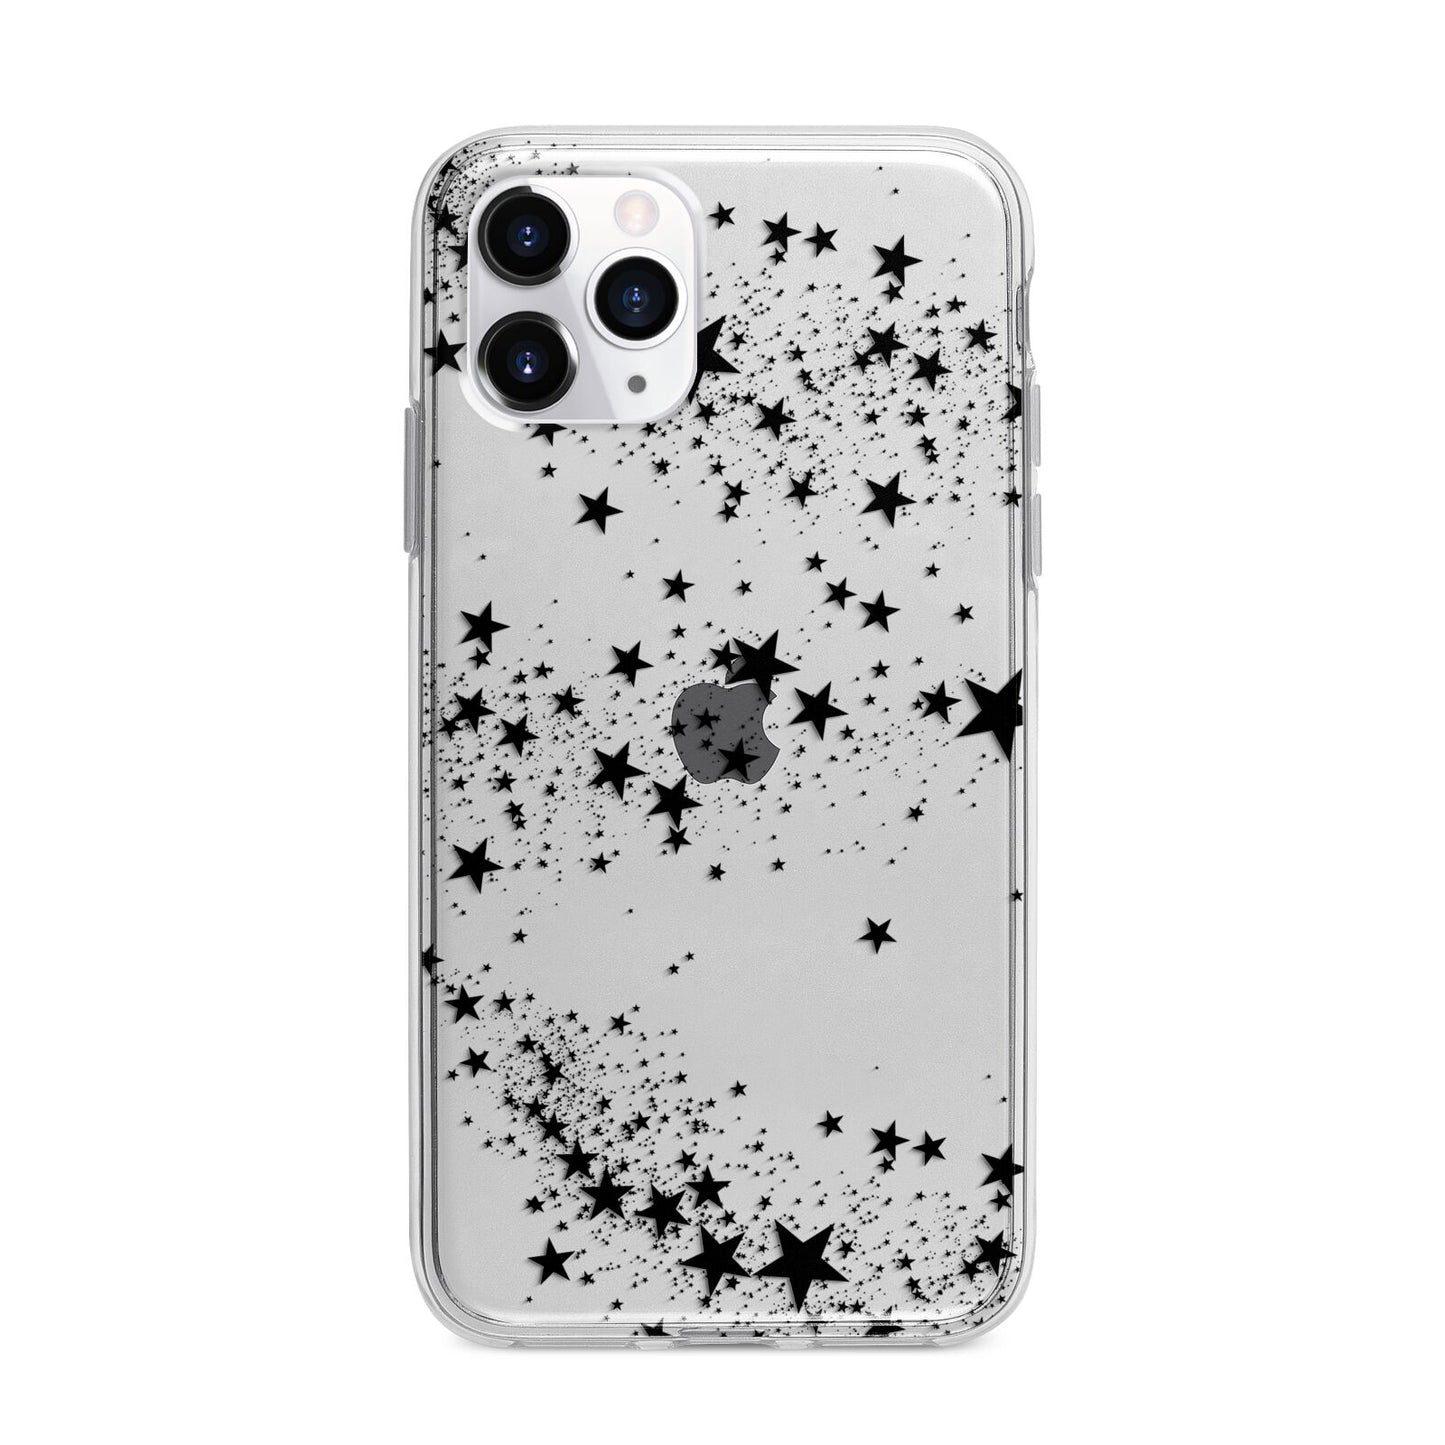 Shooting Stars Apple iPhone 11 Pro Max in Silver with Bumper Case